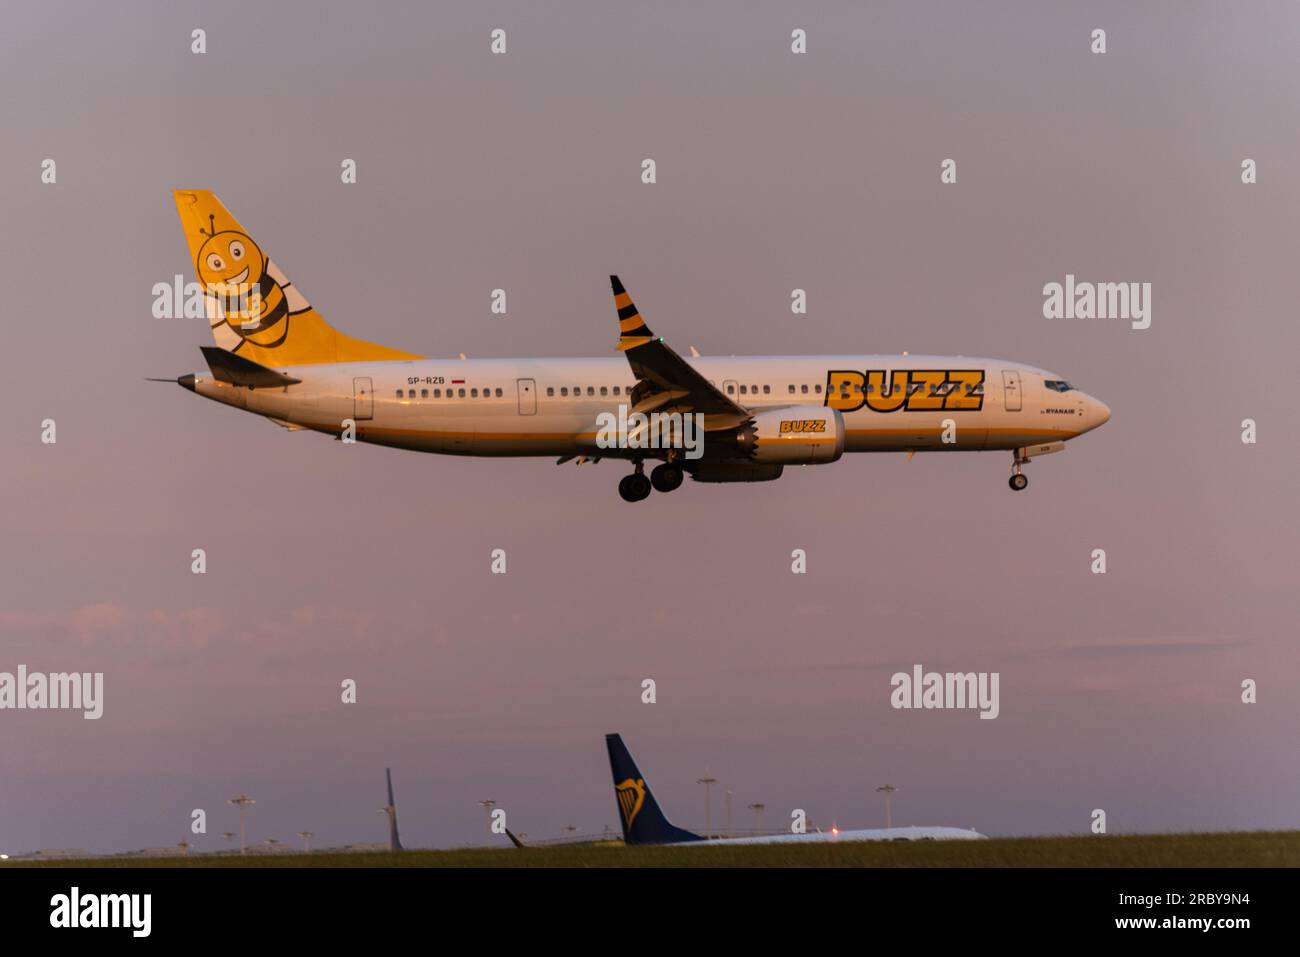 Buzz airline Boeing 737 MAX on finals to land at London Stansted Airport, Essex, UK. Boeing 737-8-200 MAX. Buzz is a Polish airline of Ryanair Stock Photo